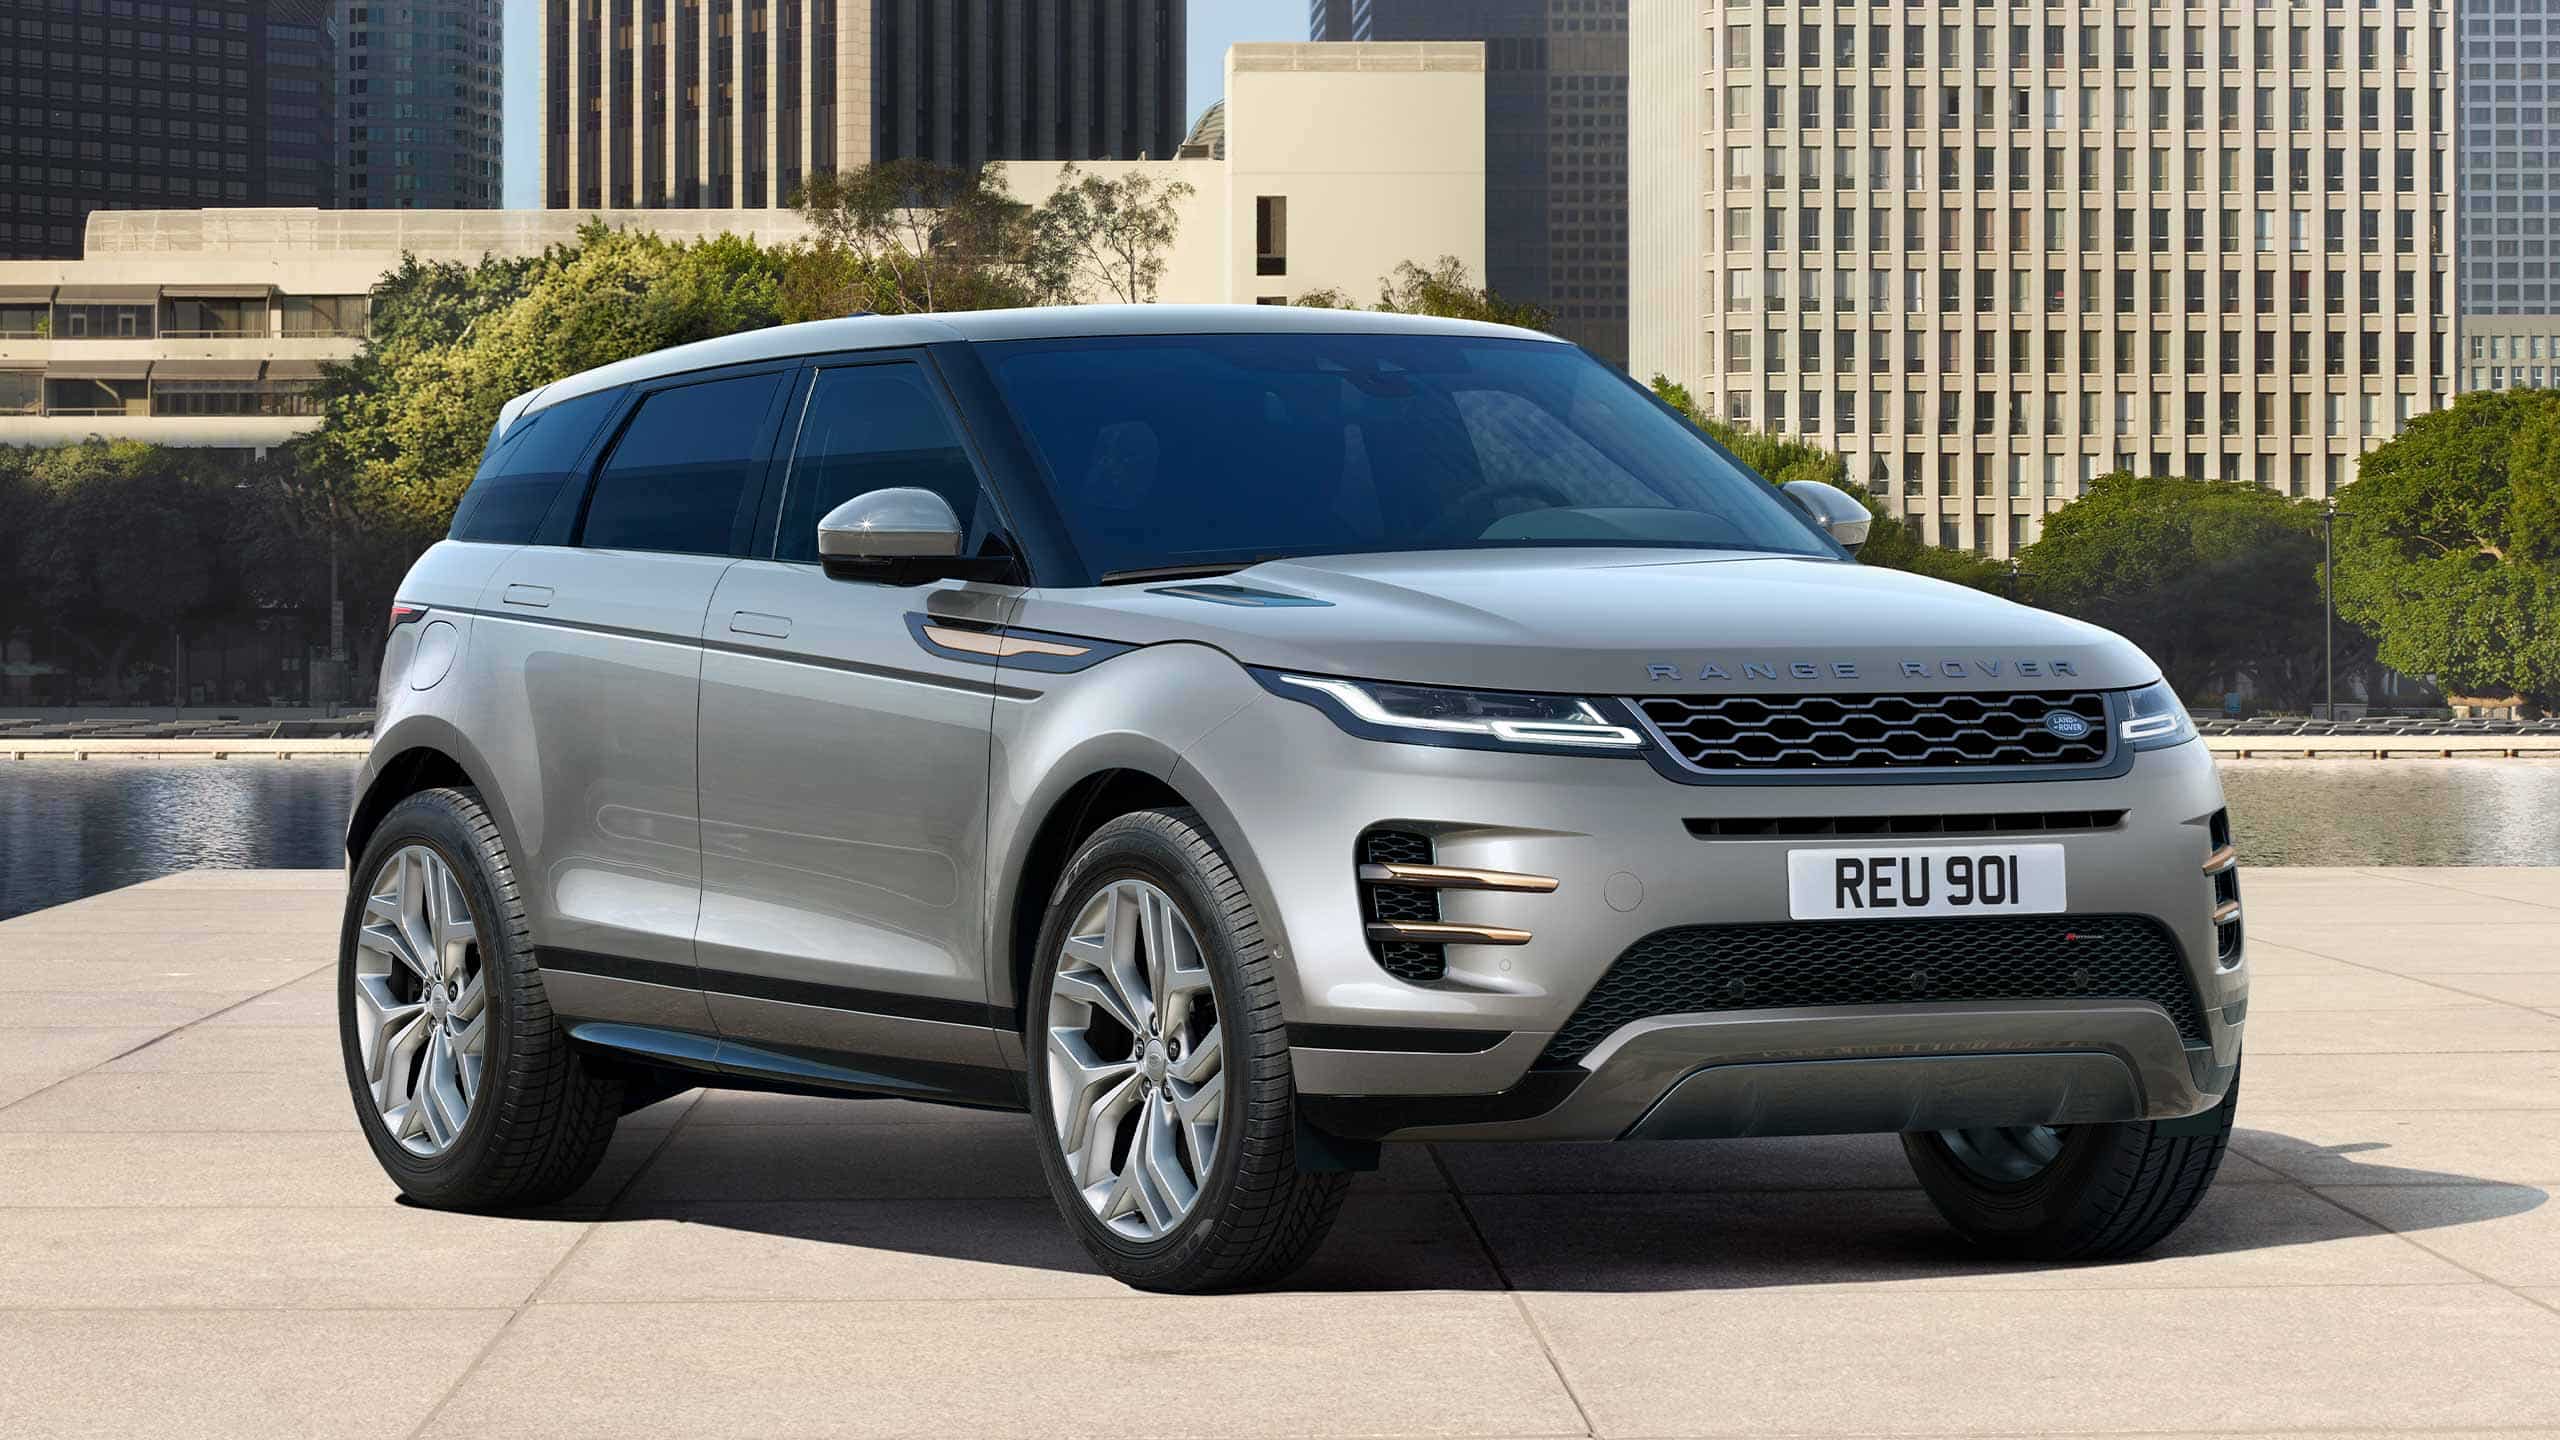 Evoque S, SE, HSE Limited Editions Range Rover